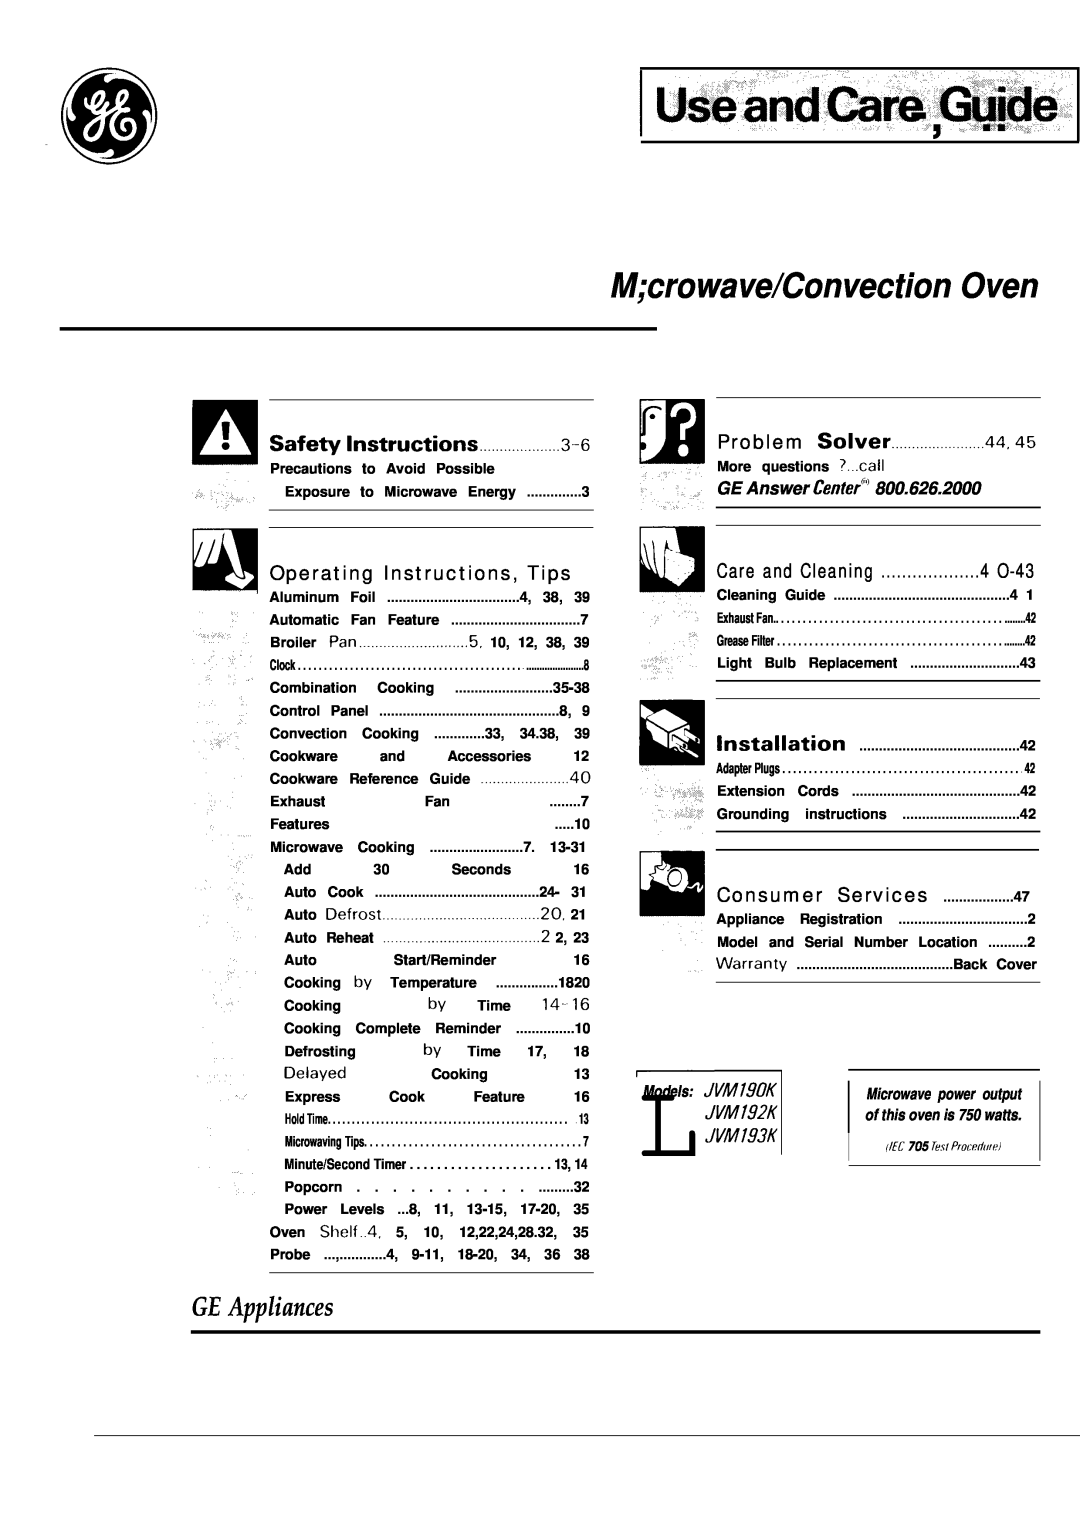 GE JVM193K manual Mcrowave/Convection Oven, GE Appliances, I usehndQre@@*.,. -, ,, . ,.,.‘, Operating Instructions, Tips 